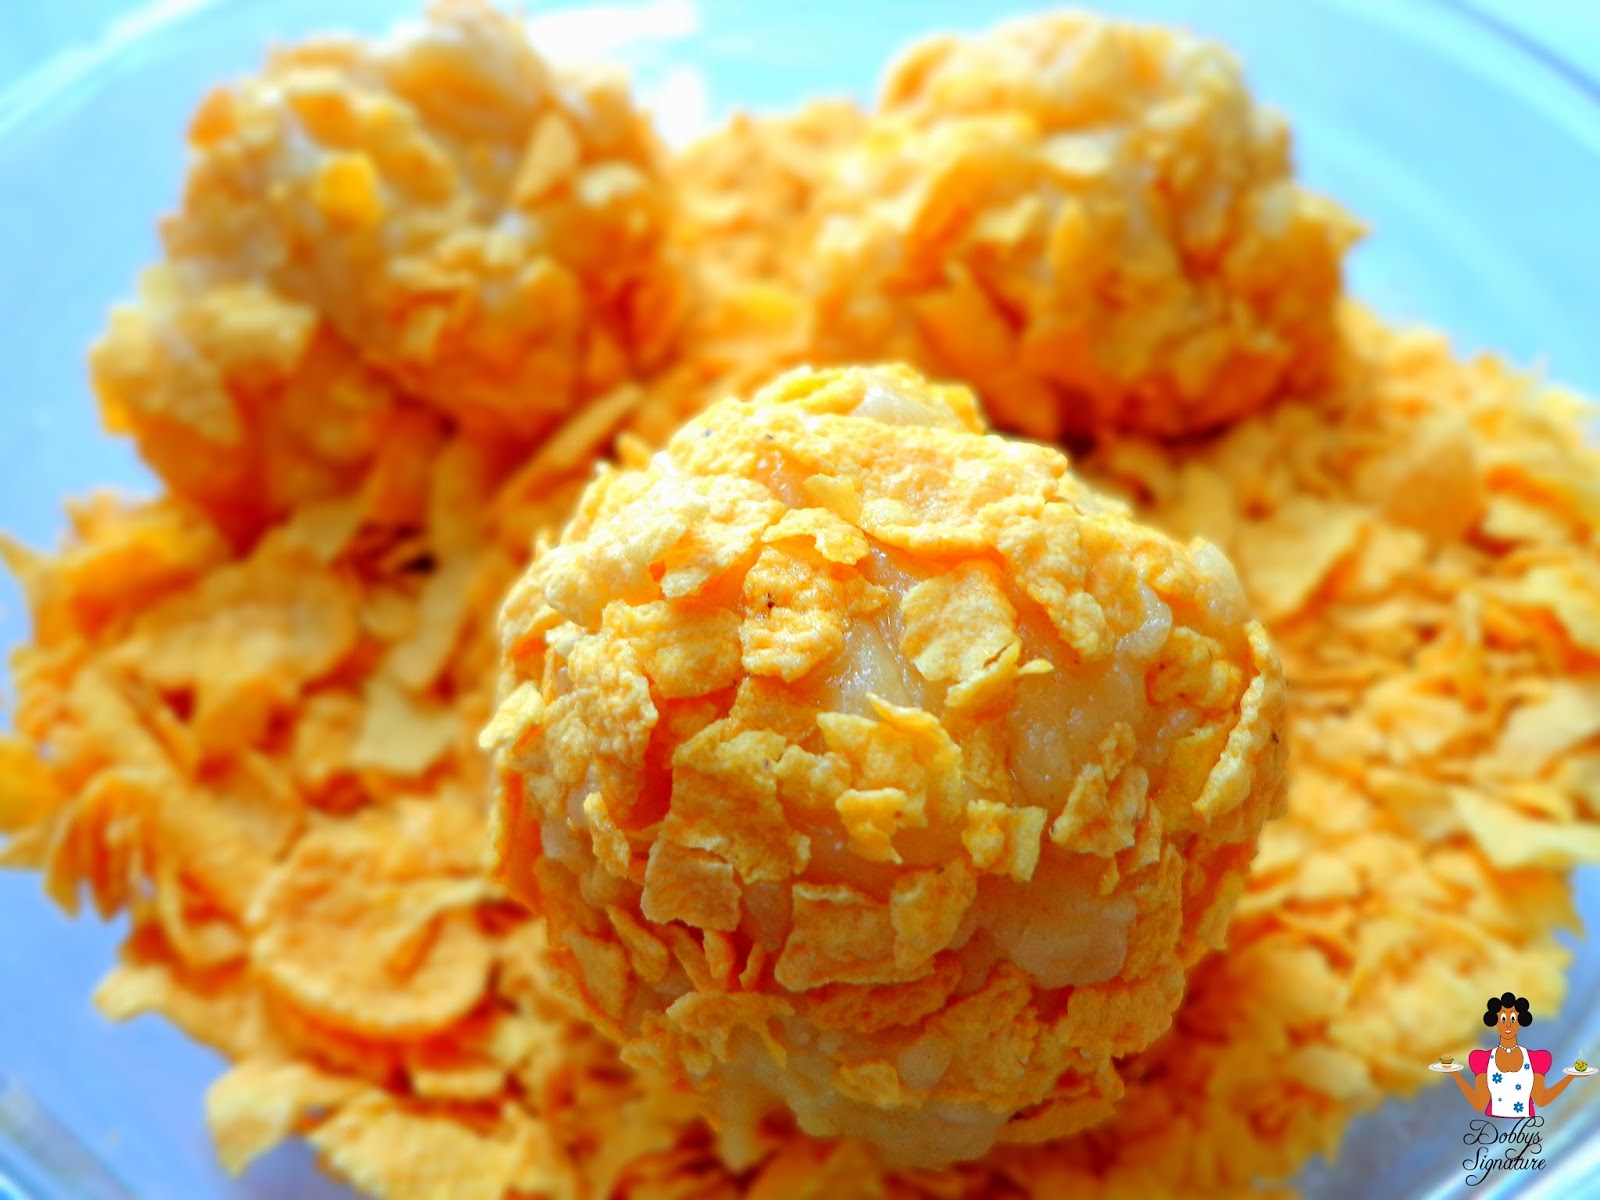 What is a good recipe for cookies made with cornflakes?